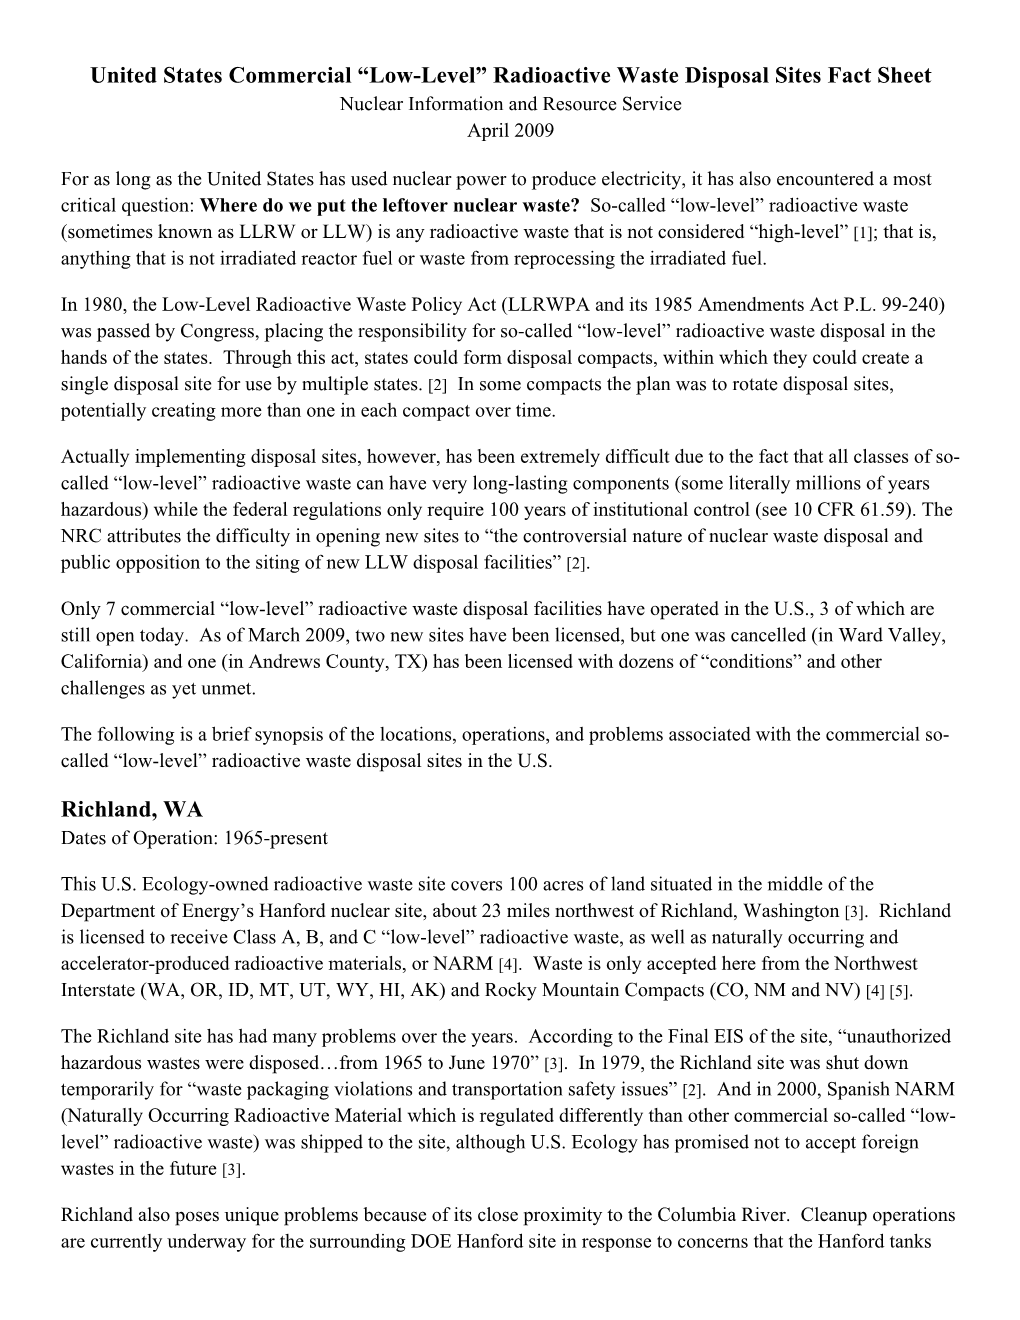 United States Commercial “Low-Level” Radioactive Waste Disposal Sites Fact Sheet Nuclear Information and Resource Service April 2009